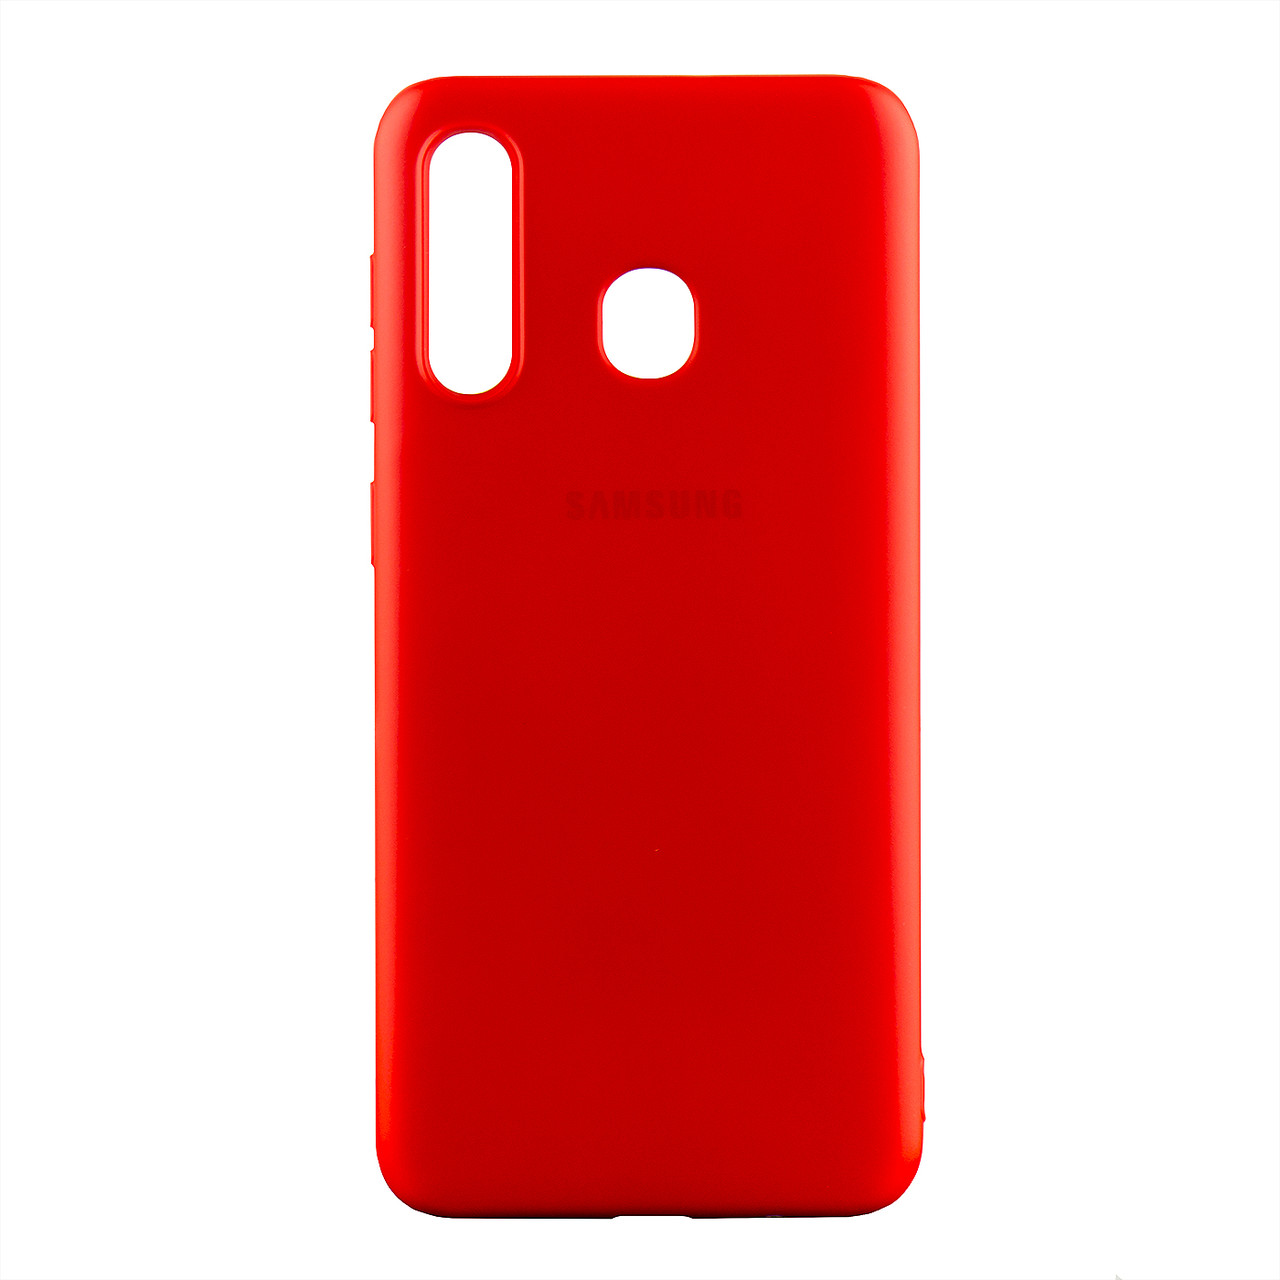 Чехол для Samsung Galaxy A20/A30 back cover Silky and soft-touch Silicone Cover Red - фото 1 - id-p115018373